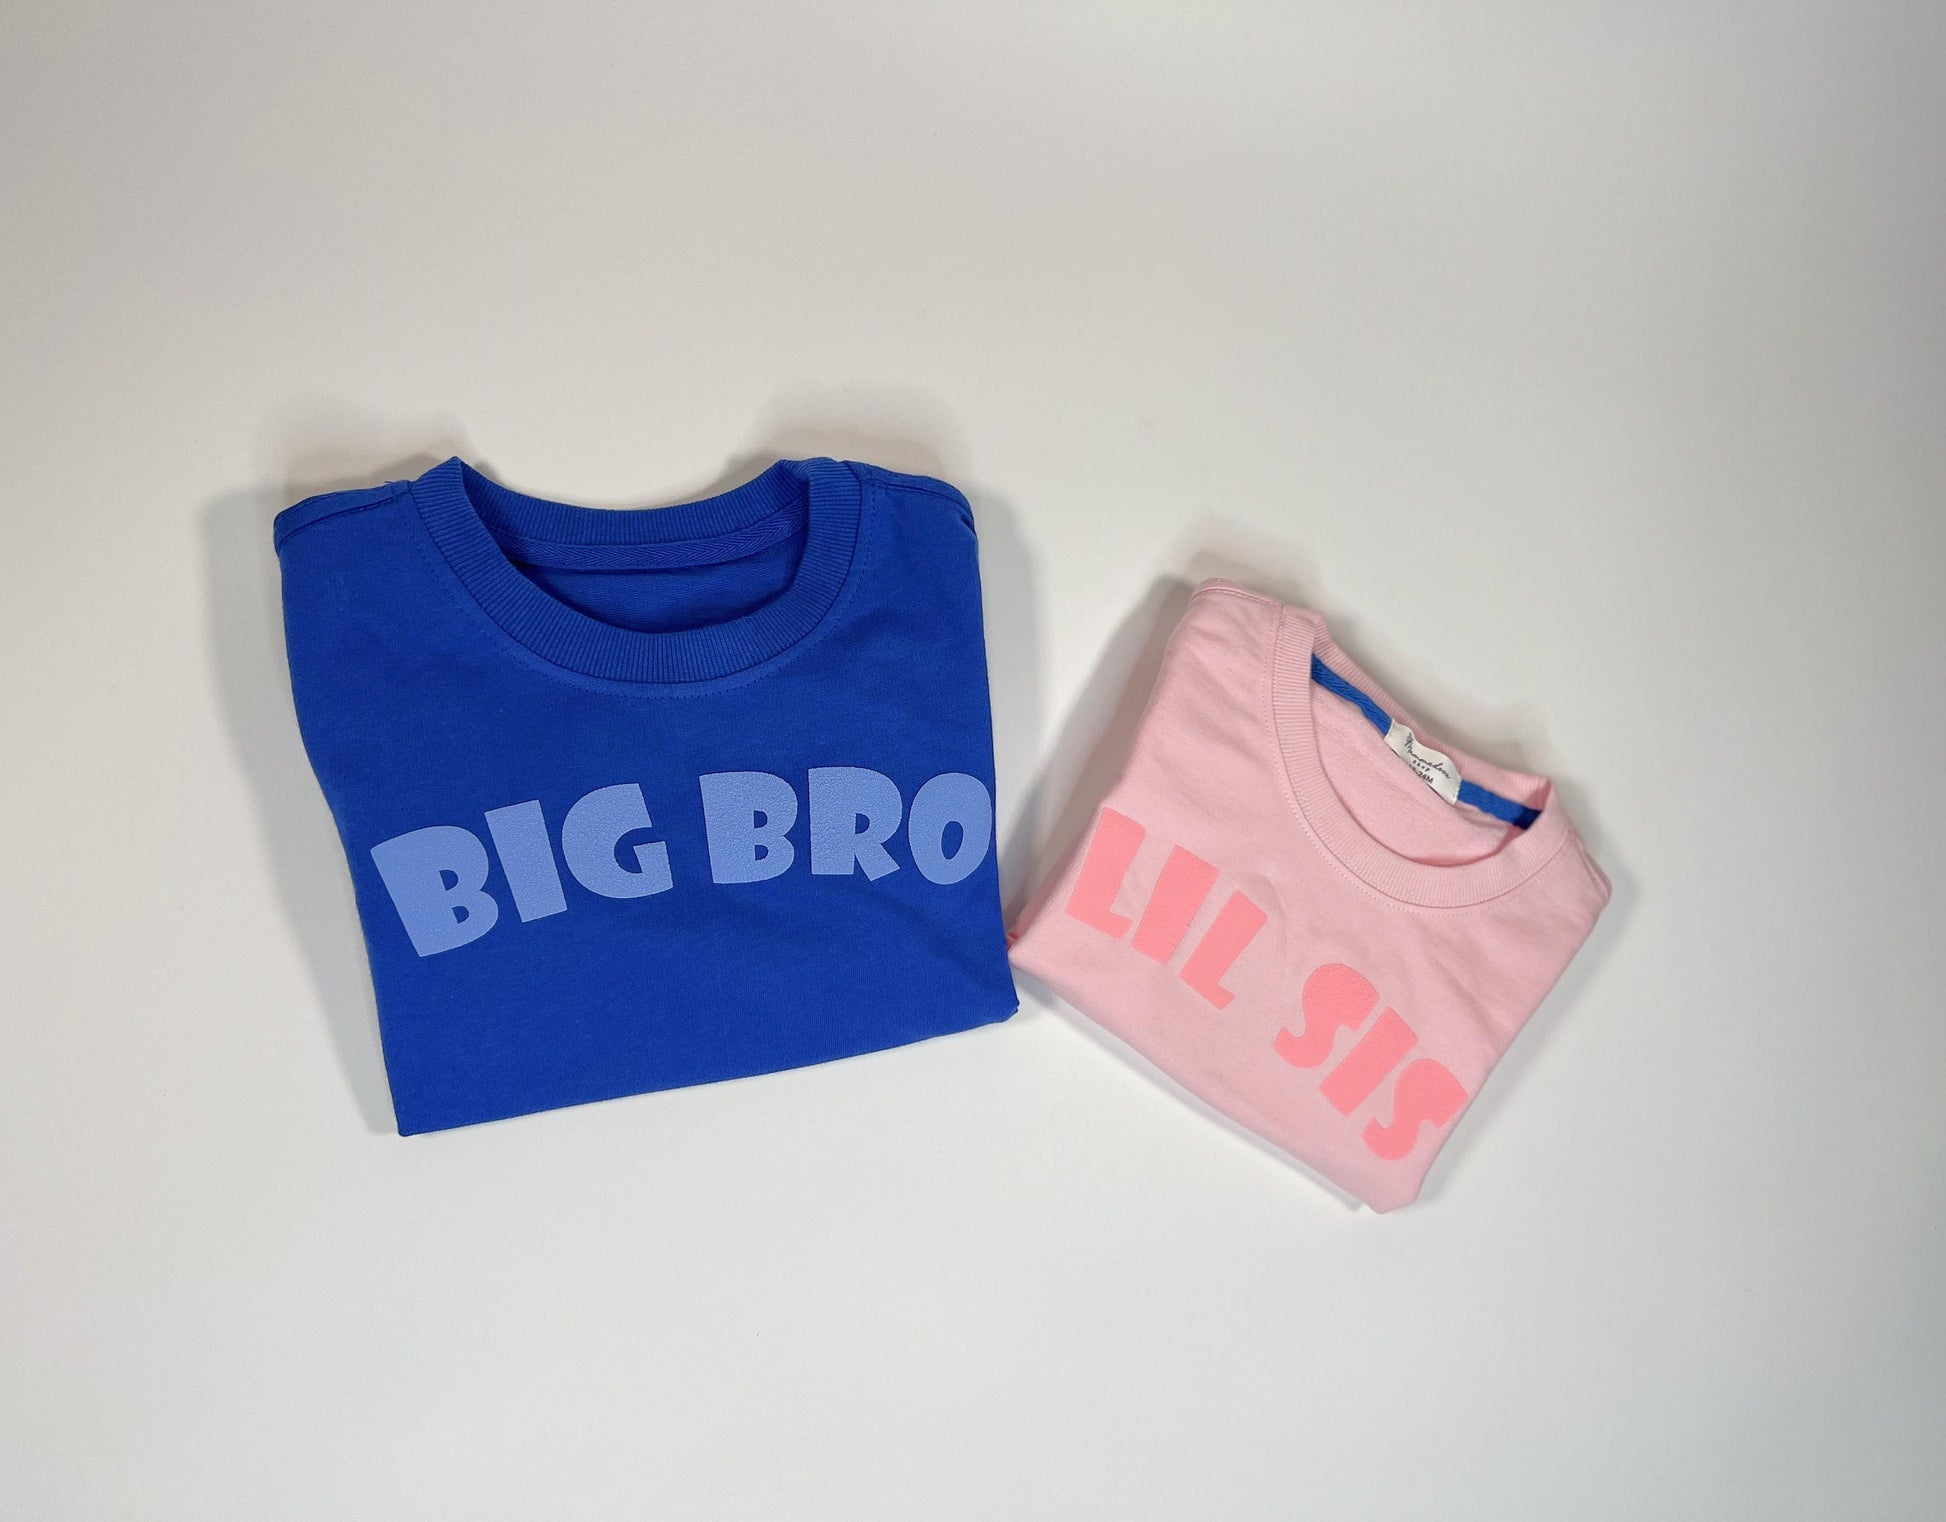 Big Bro, Big Sis, Lil Bro, Little Sis Sweater romper for kids/toddlers. 18 months to 5T